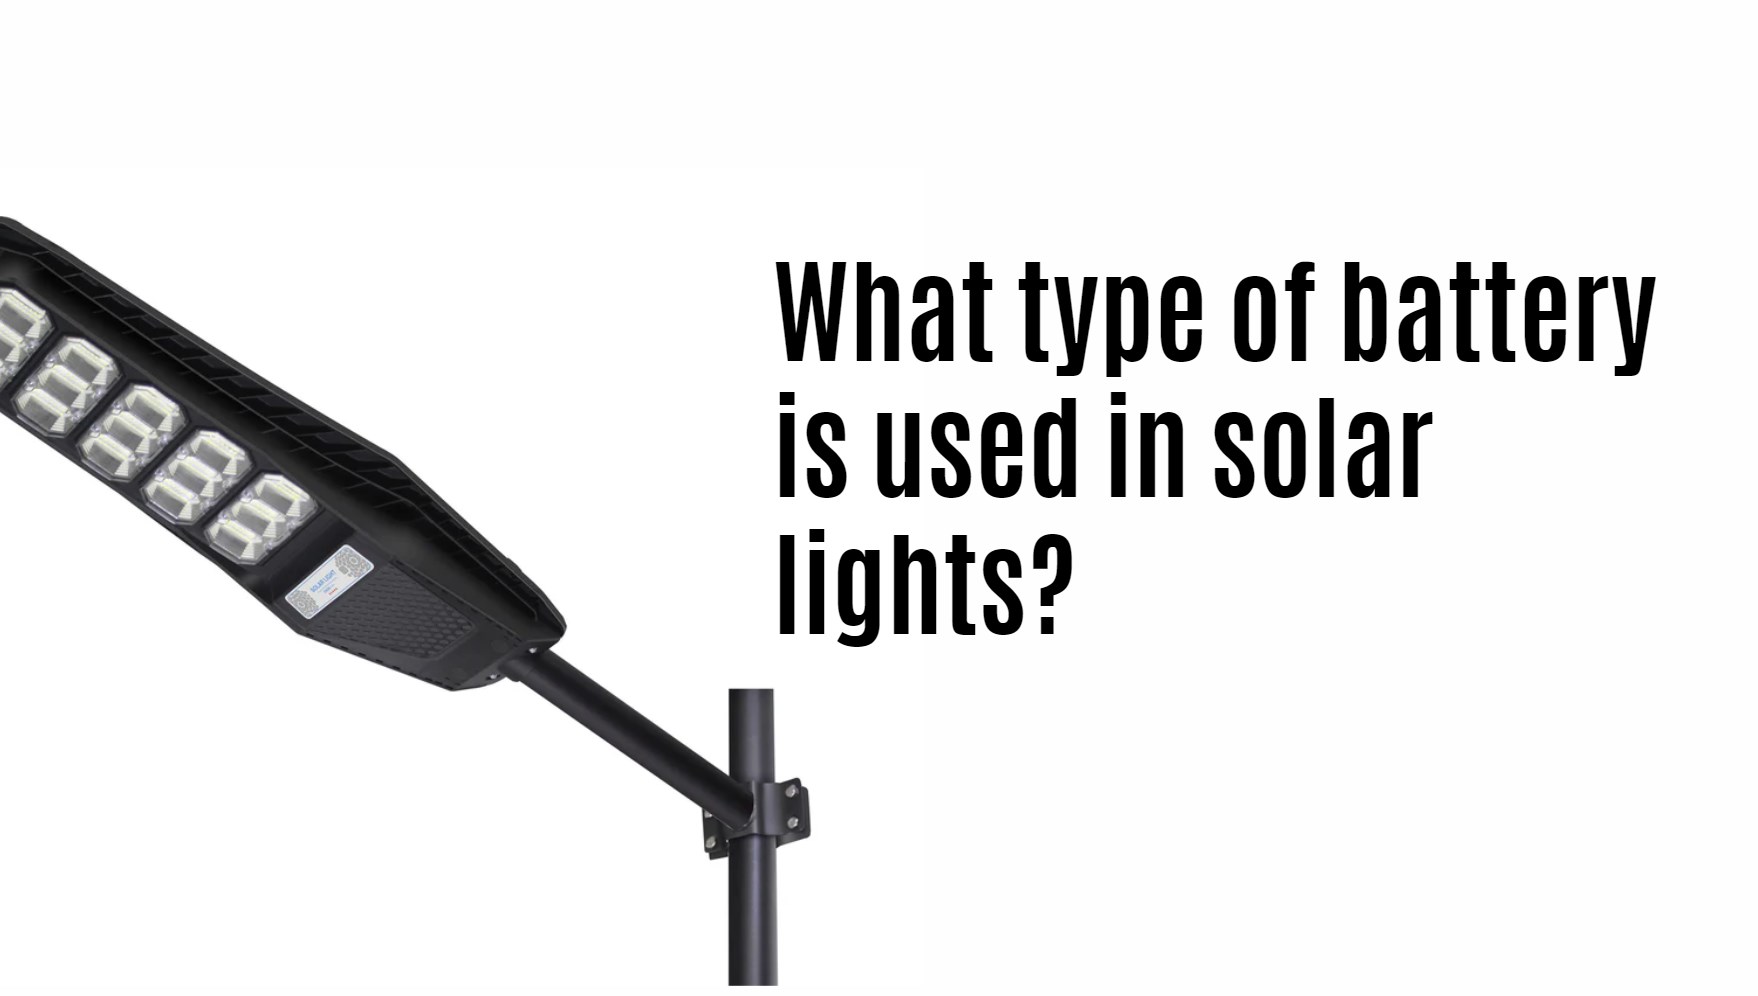 What type of battery is used in solar lights?